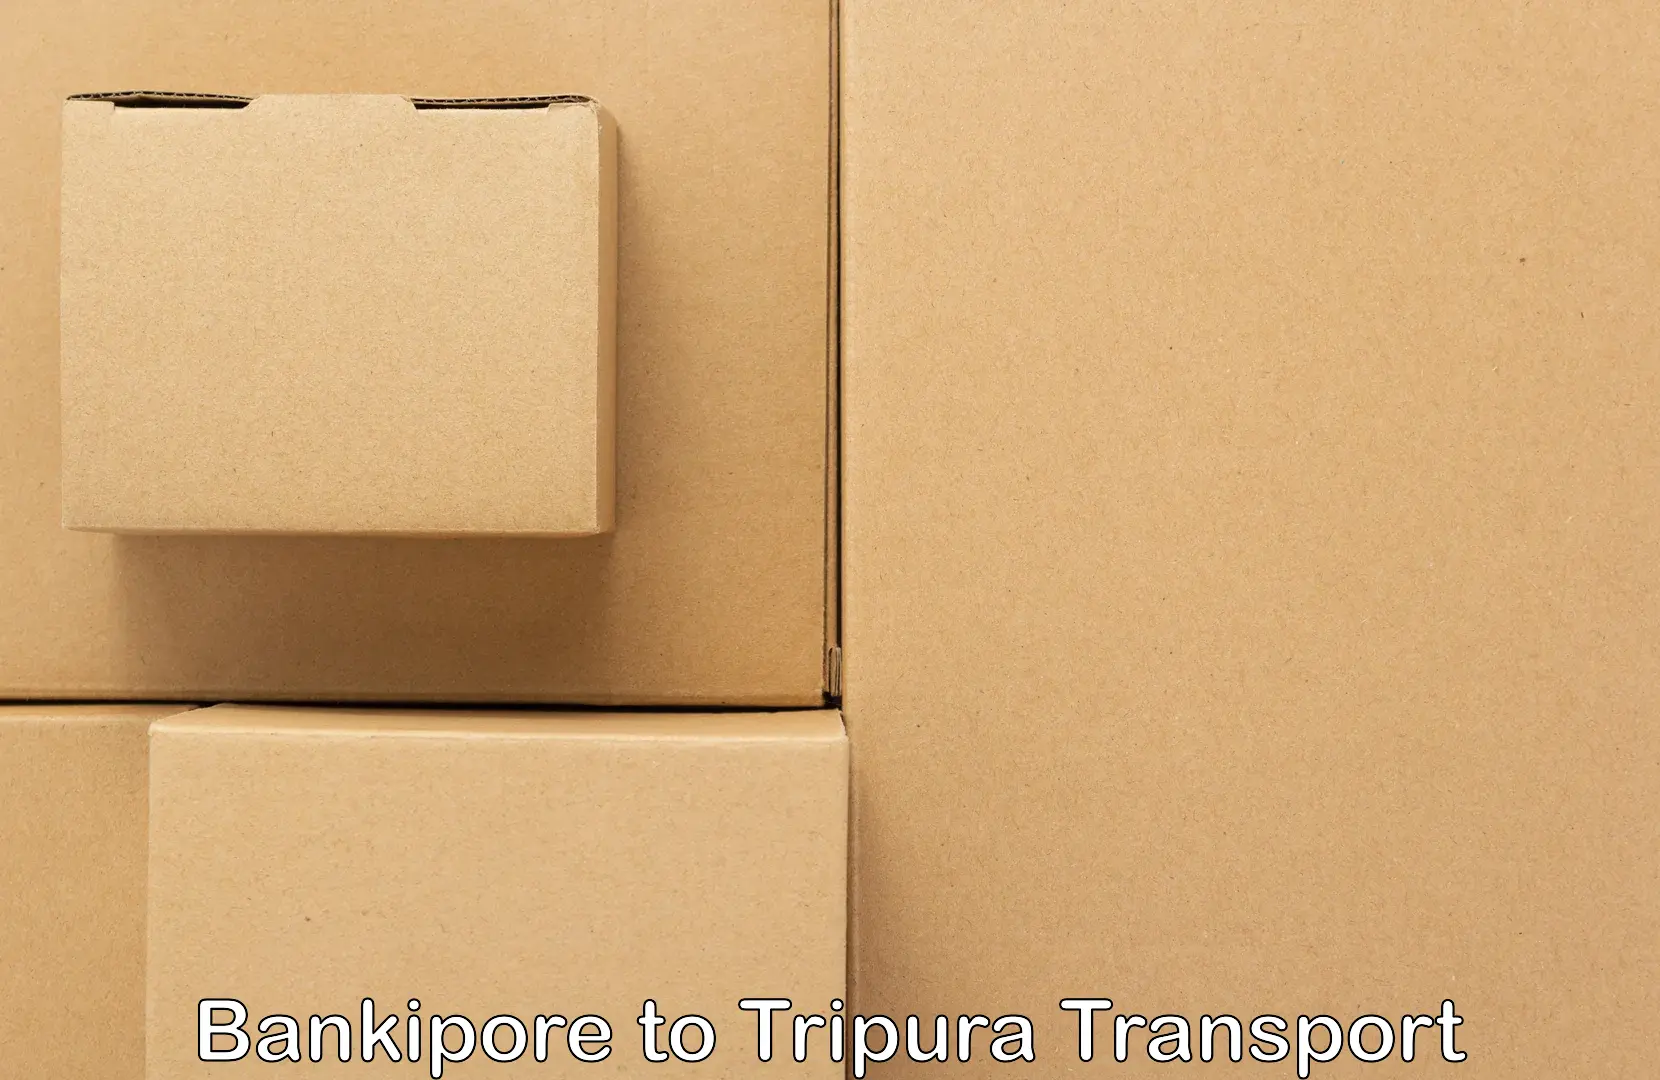 Delivery service Bankipore to North Tripura